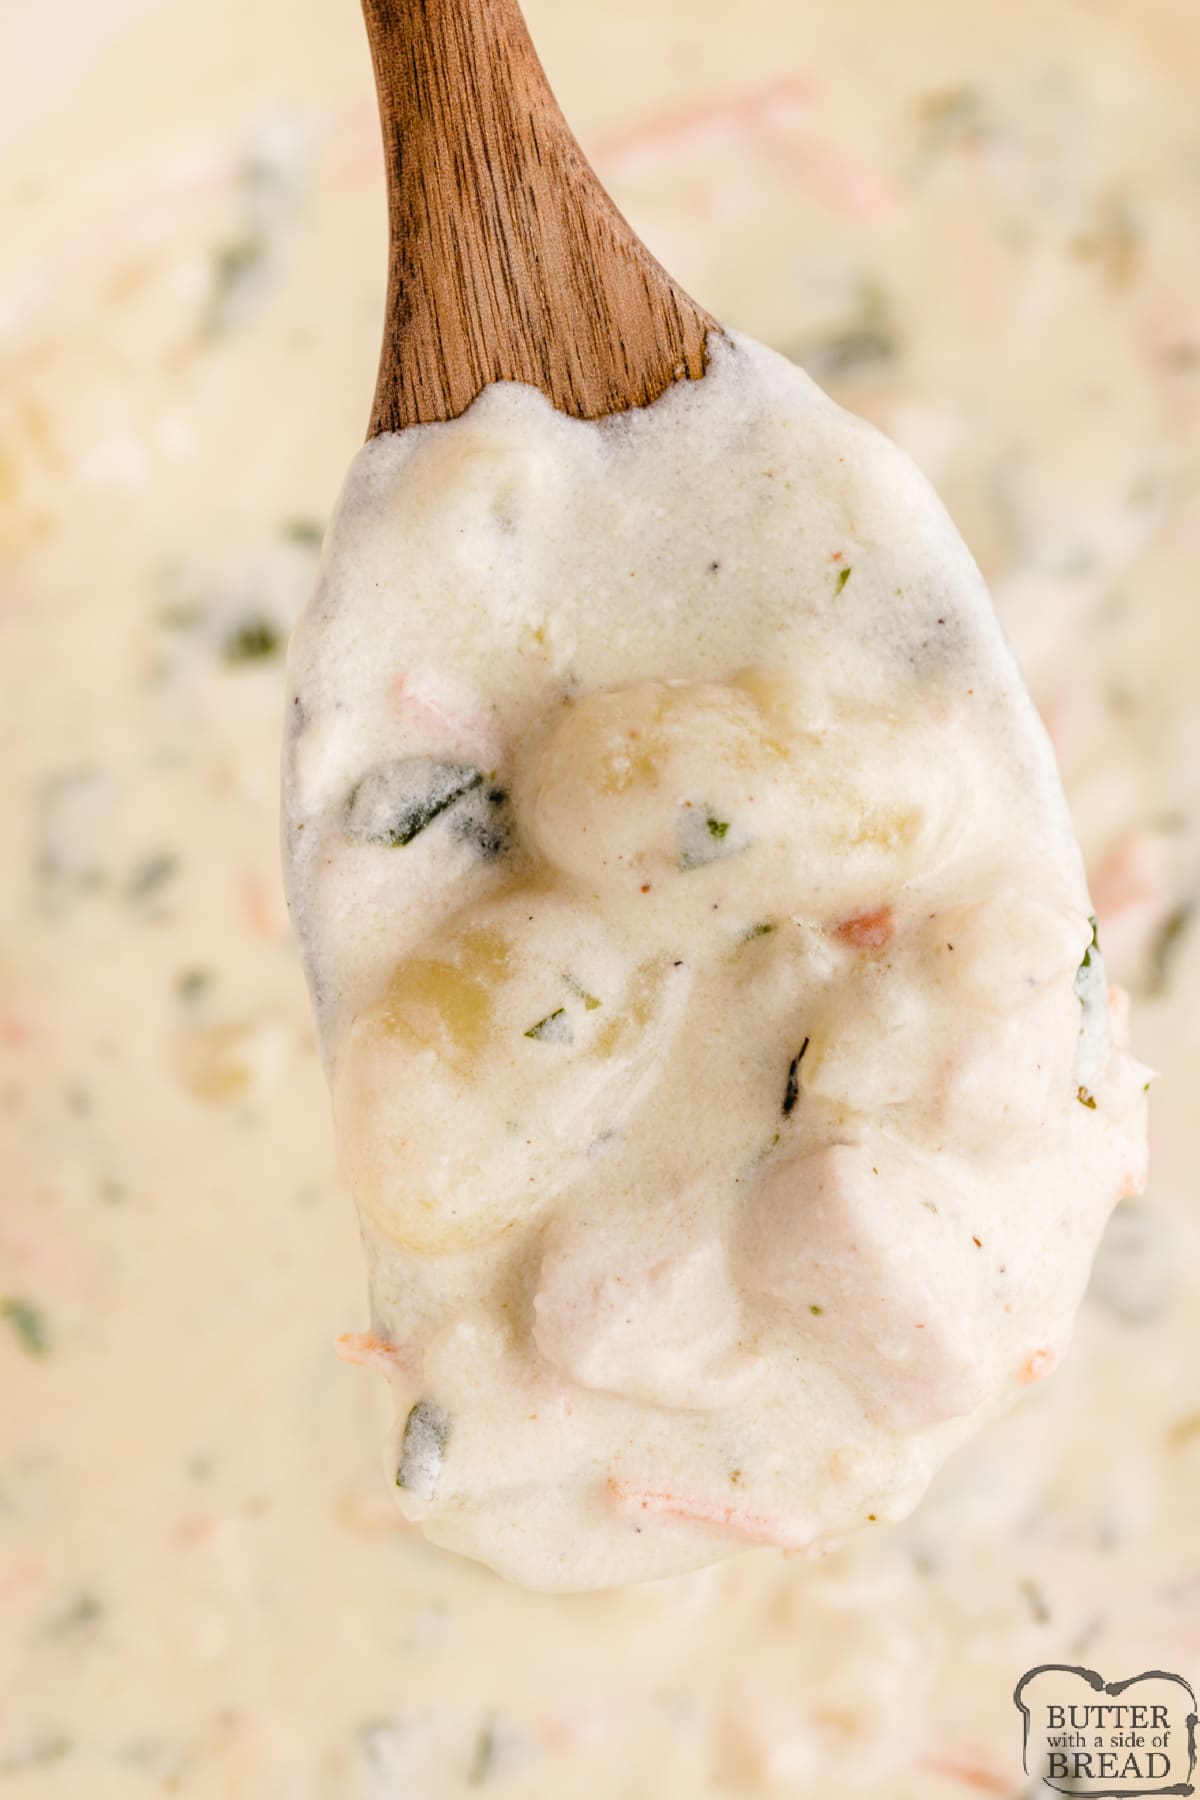 Olive Garden Chicken Gnocchi Soup is deliciously creamy and takes less than 30 minutes to make. This copycat Olive Garden soup recipe tastes just like the restaurant version!